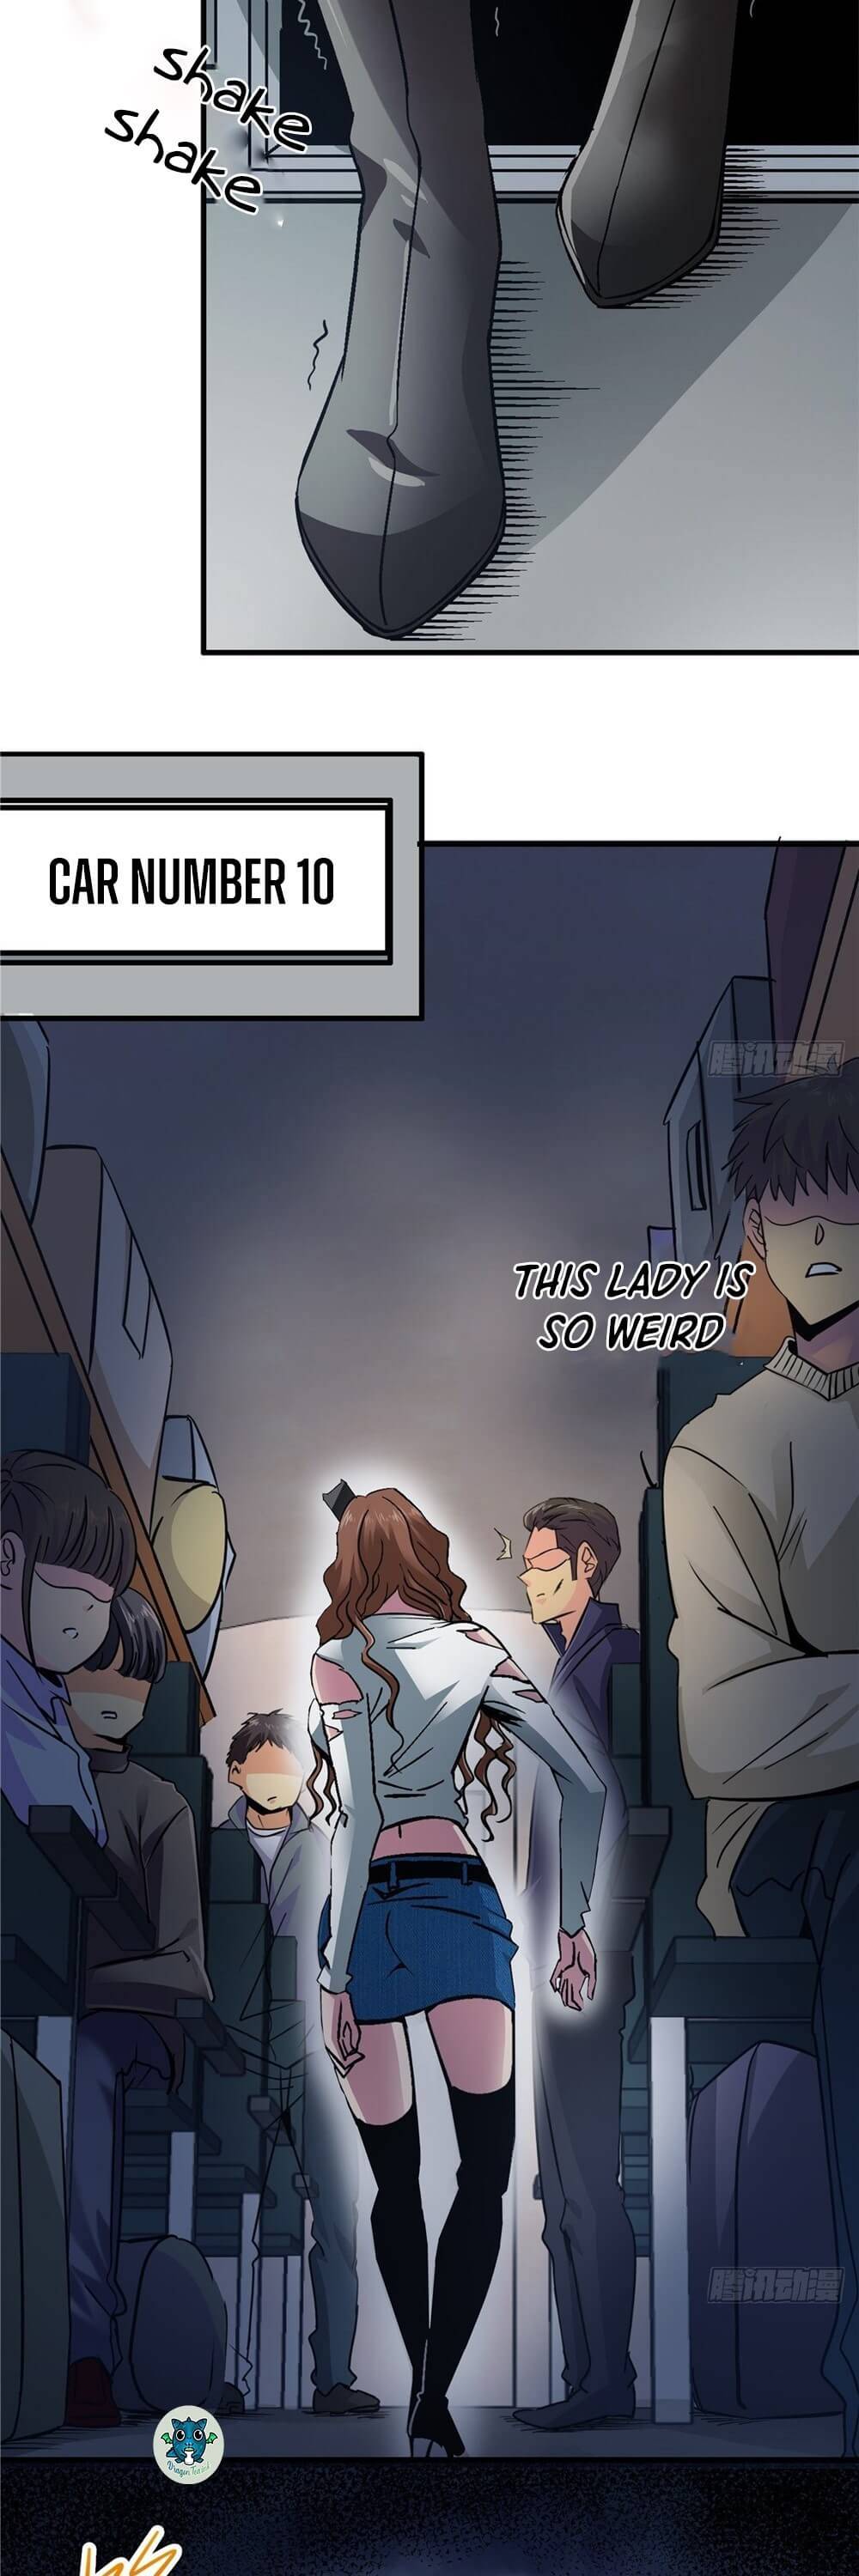 Northern Train X47 Chapter 5 - Page 2